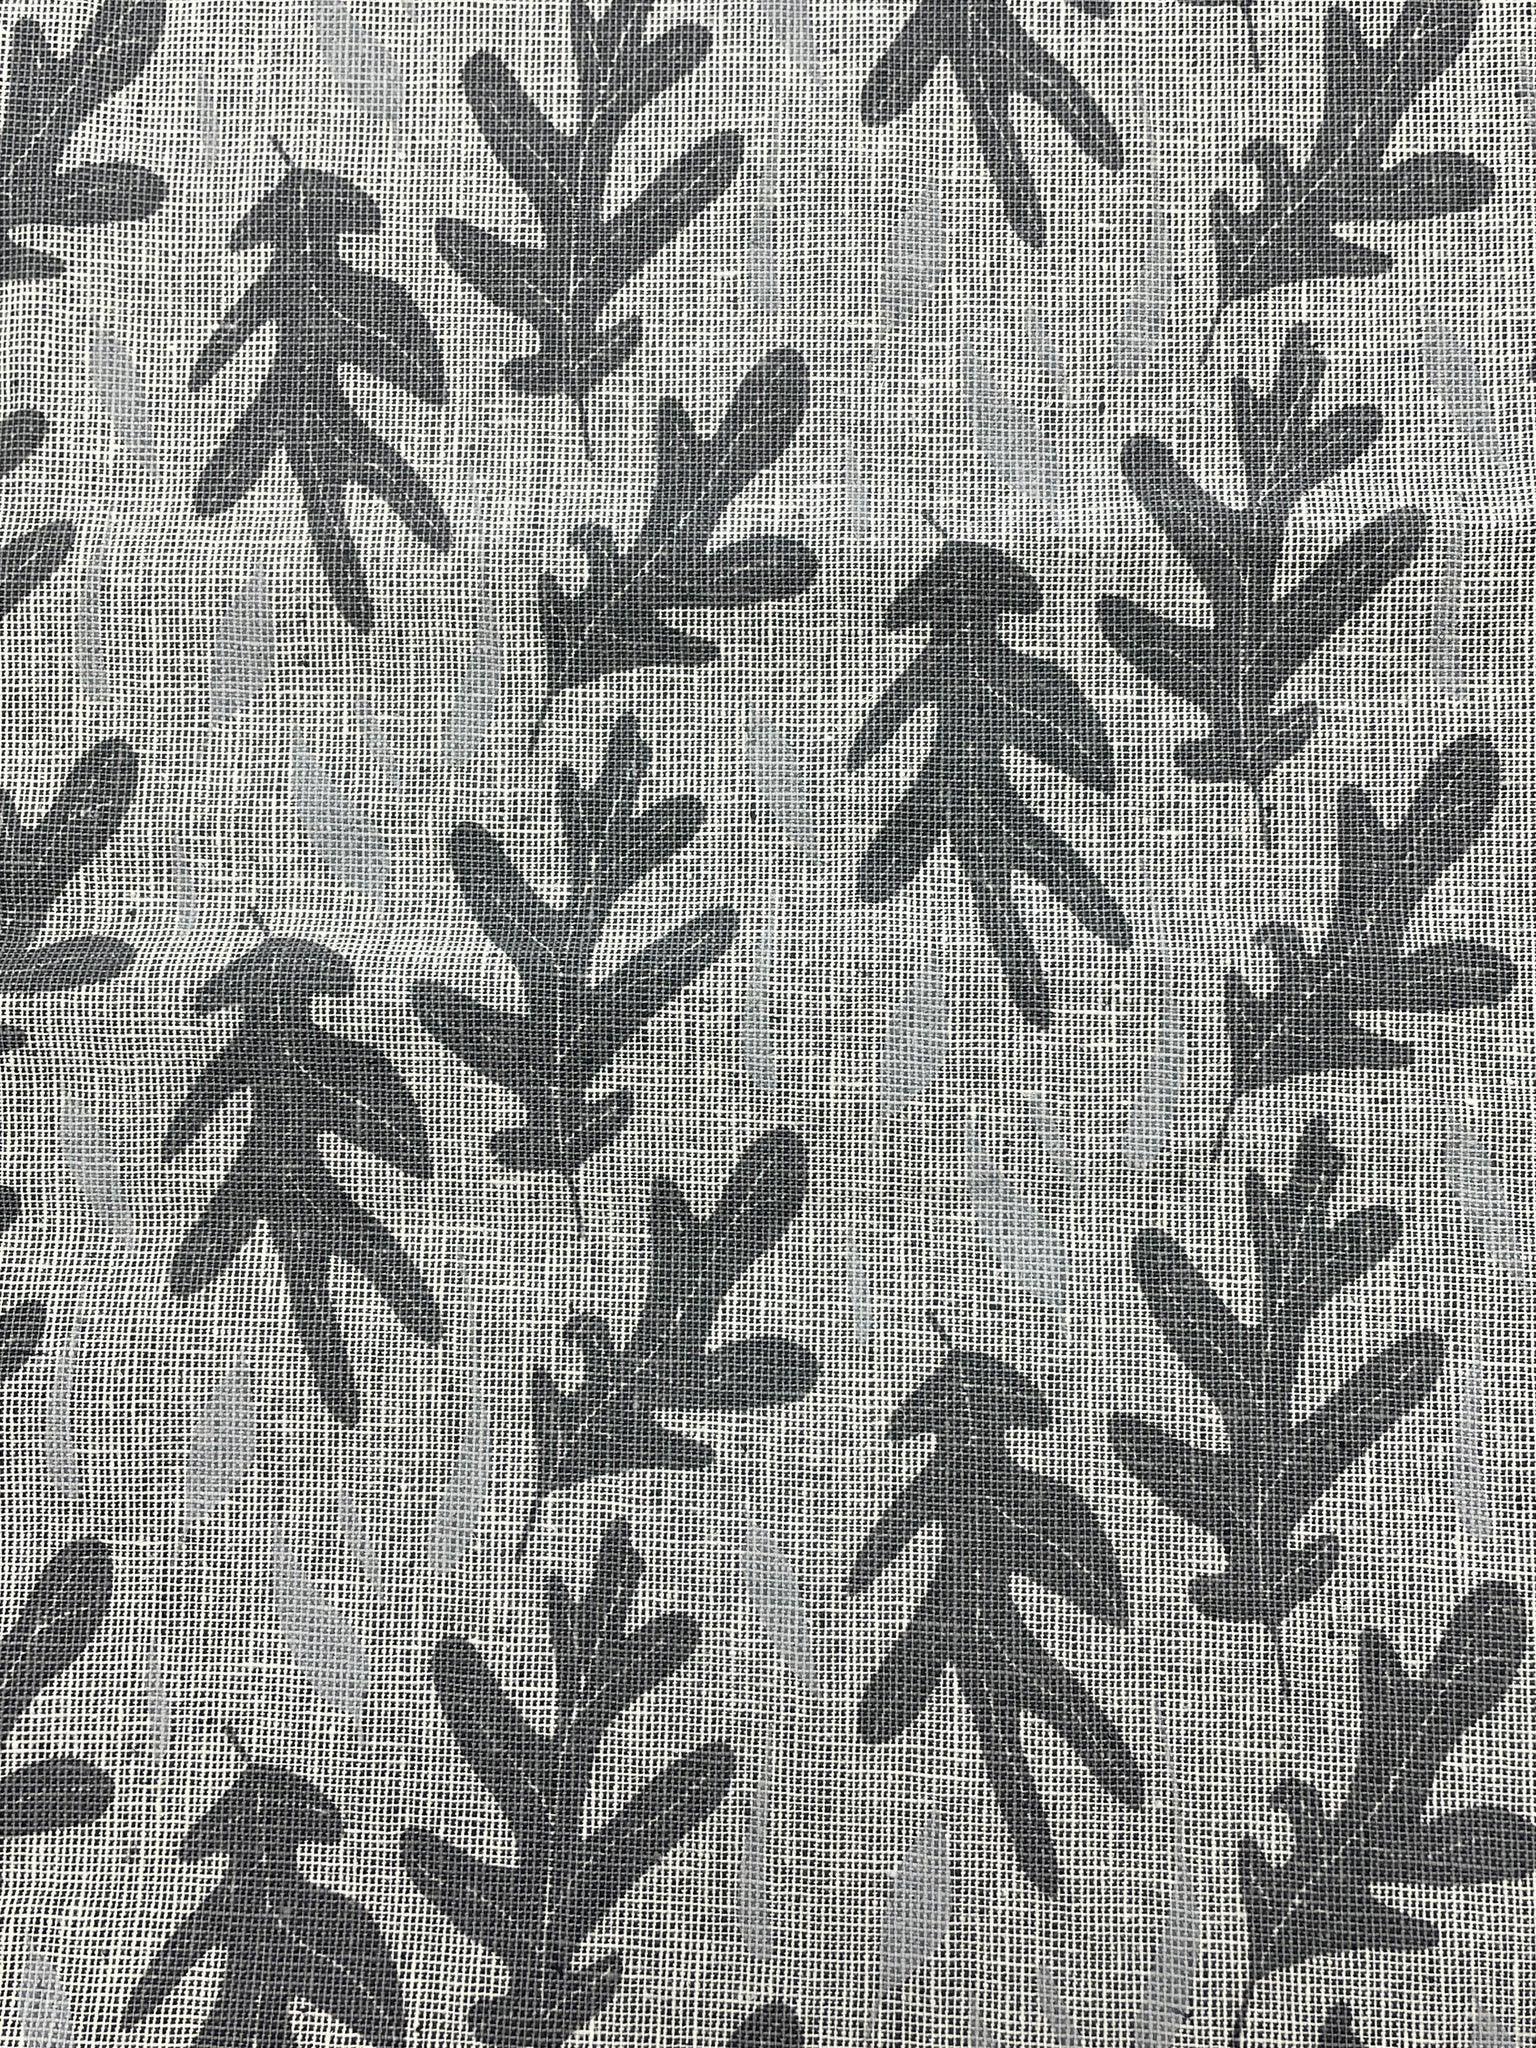 1 3/4 YD Cotton - Light Gray with Medium and Dark Gray Leaves